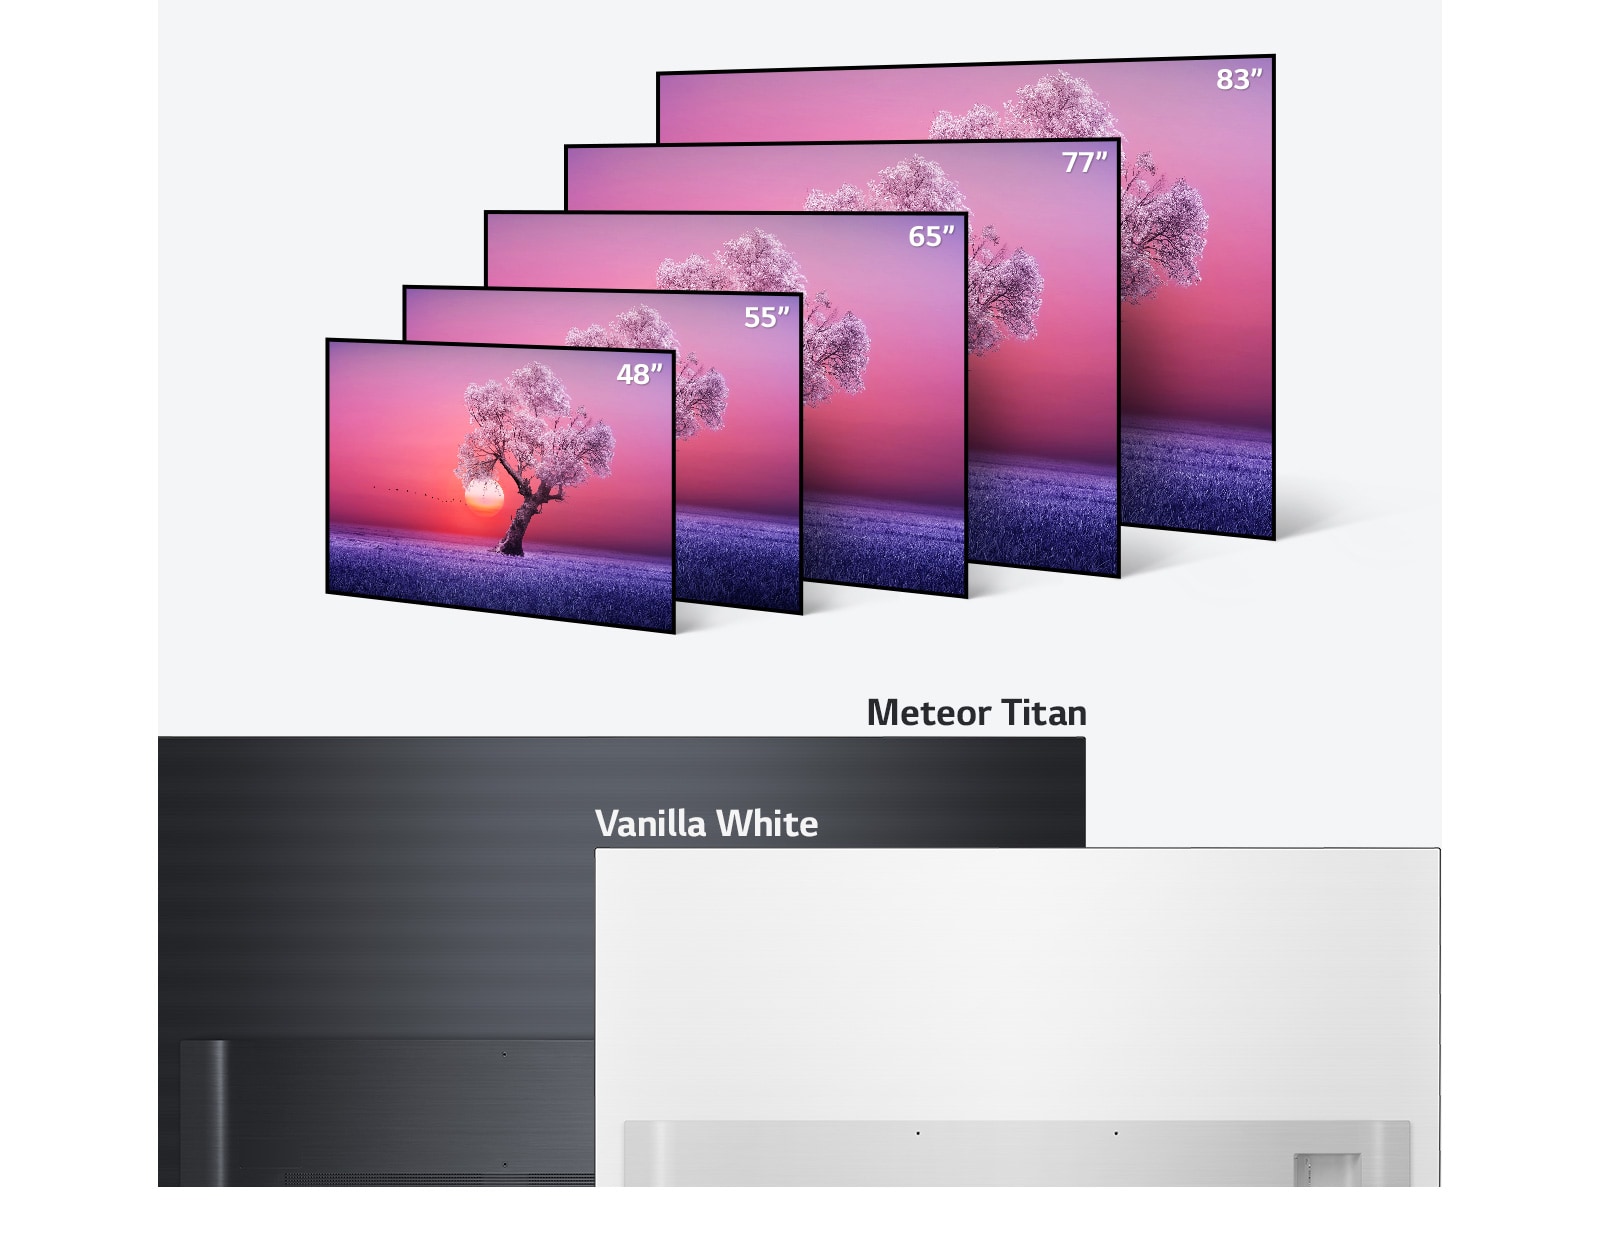 LG OLED TV lineup in various sizes from 48 inches to 83 inches and colors in light black and vanilla white